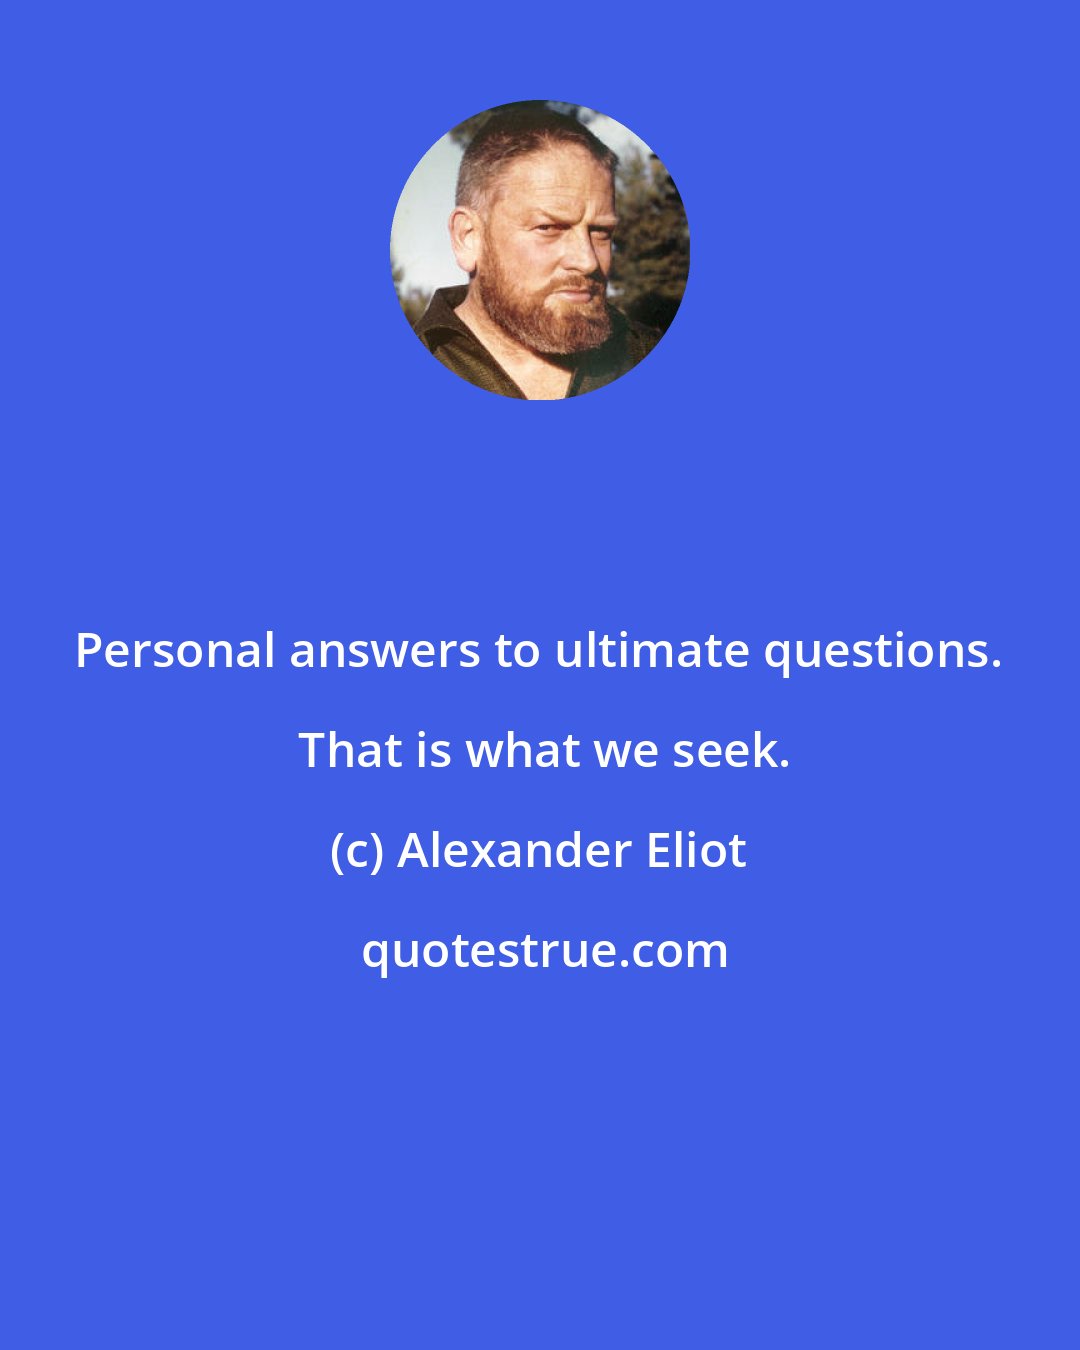 Alexander Eliot: Personal answers to ultimate questions.  That is what we seek.